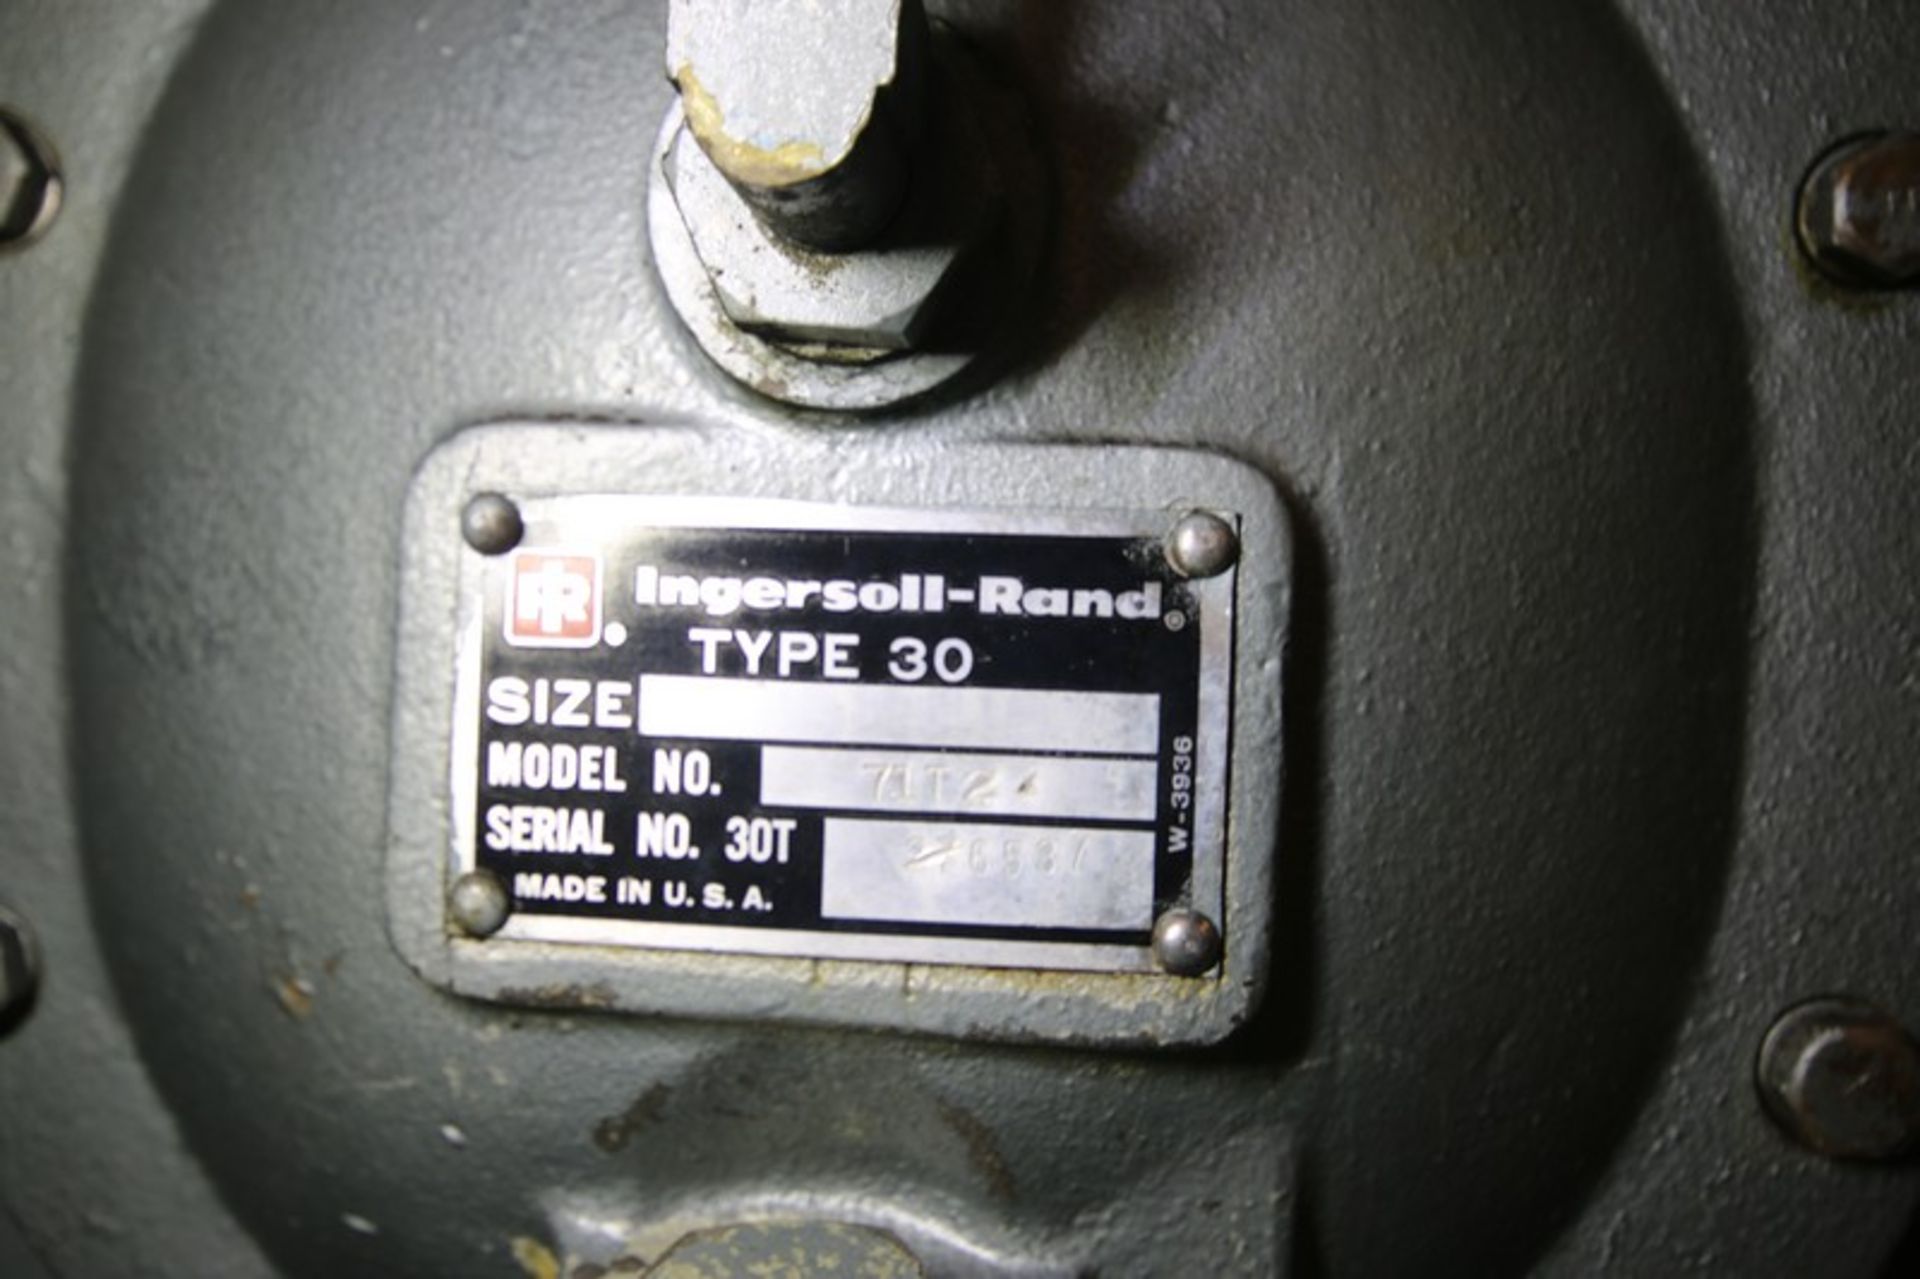 Ingersoll Rand 10 hp Reciprocating Air Compressor, Model 71T4, SN 276537, 1740 rpm, 230/460V, - Image 2 of 7